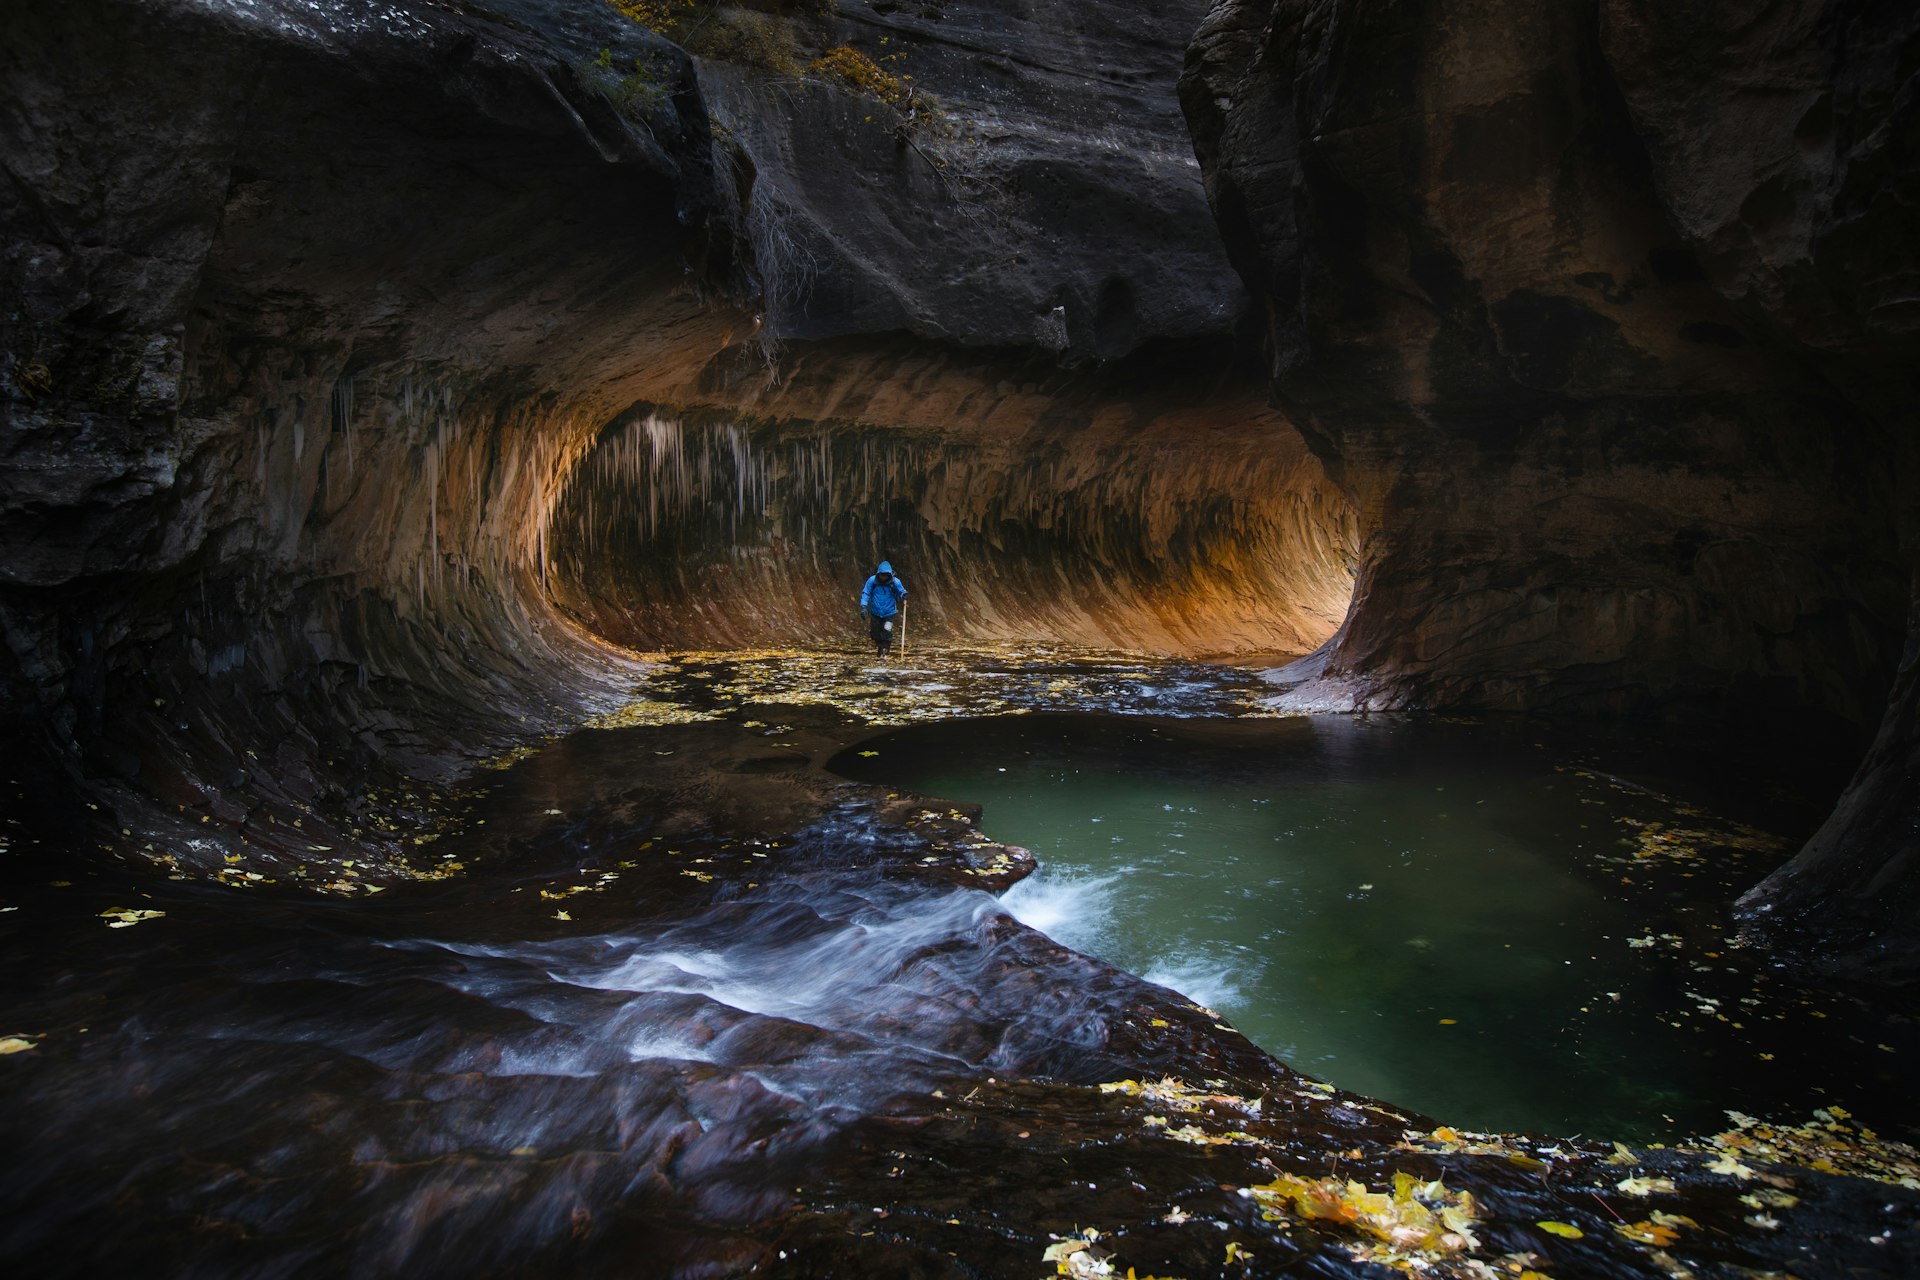 Hiker walking past a pool of water on the Subway trail in Zion National Park, Utah